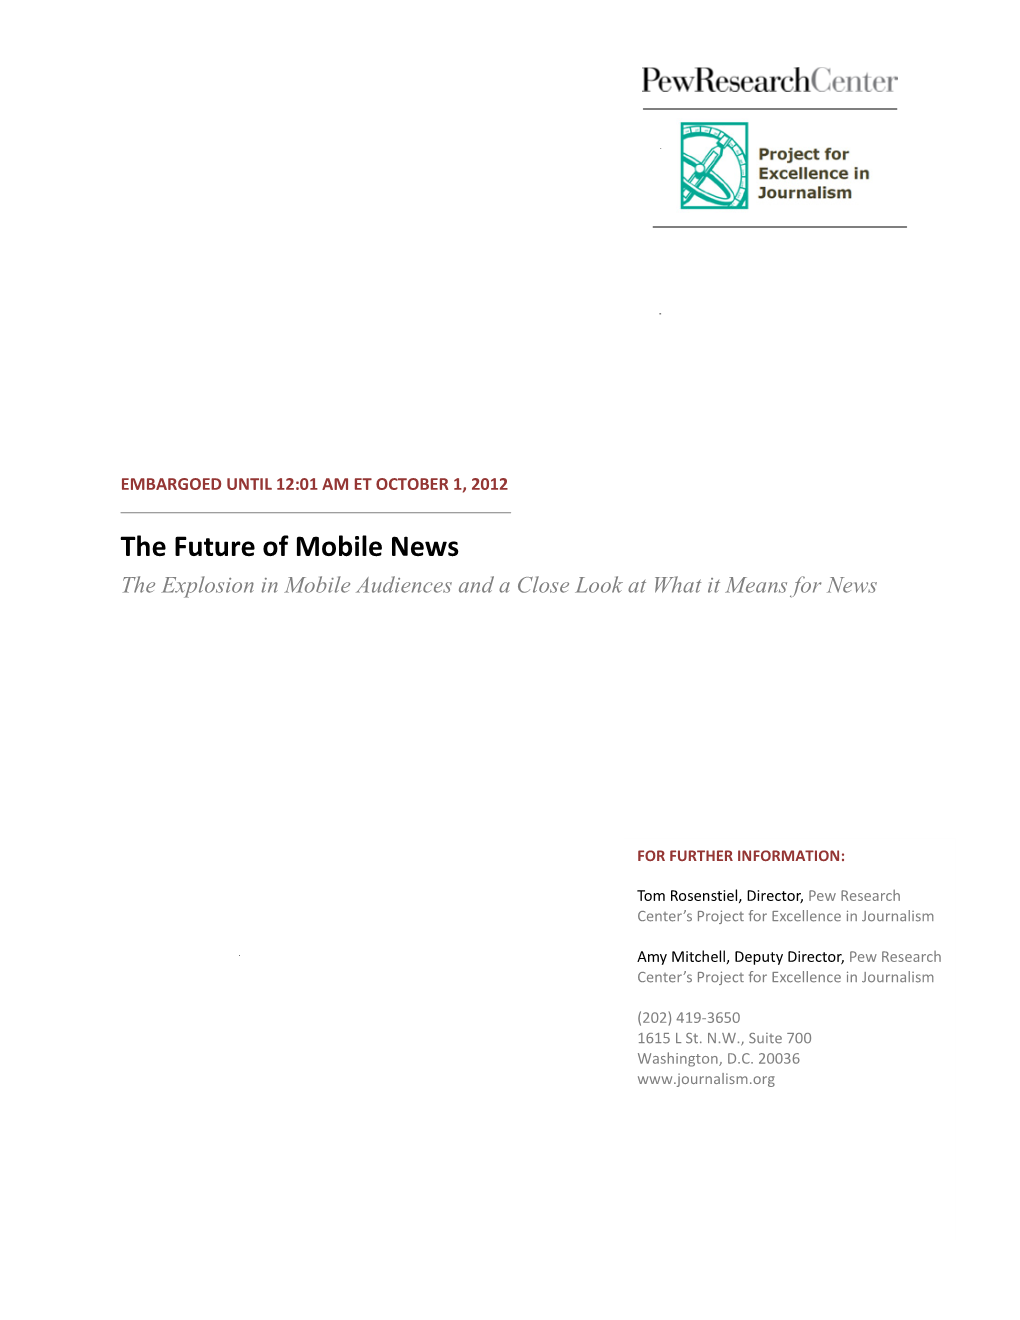 The Future of Mobile News the Explosion in Mobile Audiences and a Close Look at What It Means for News